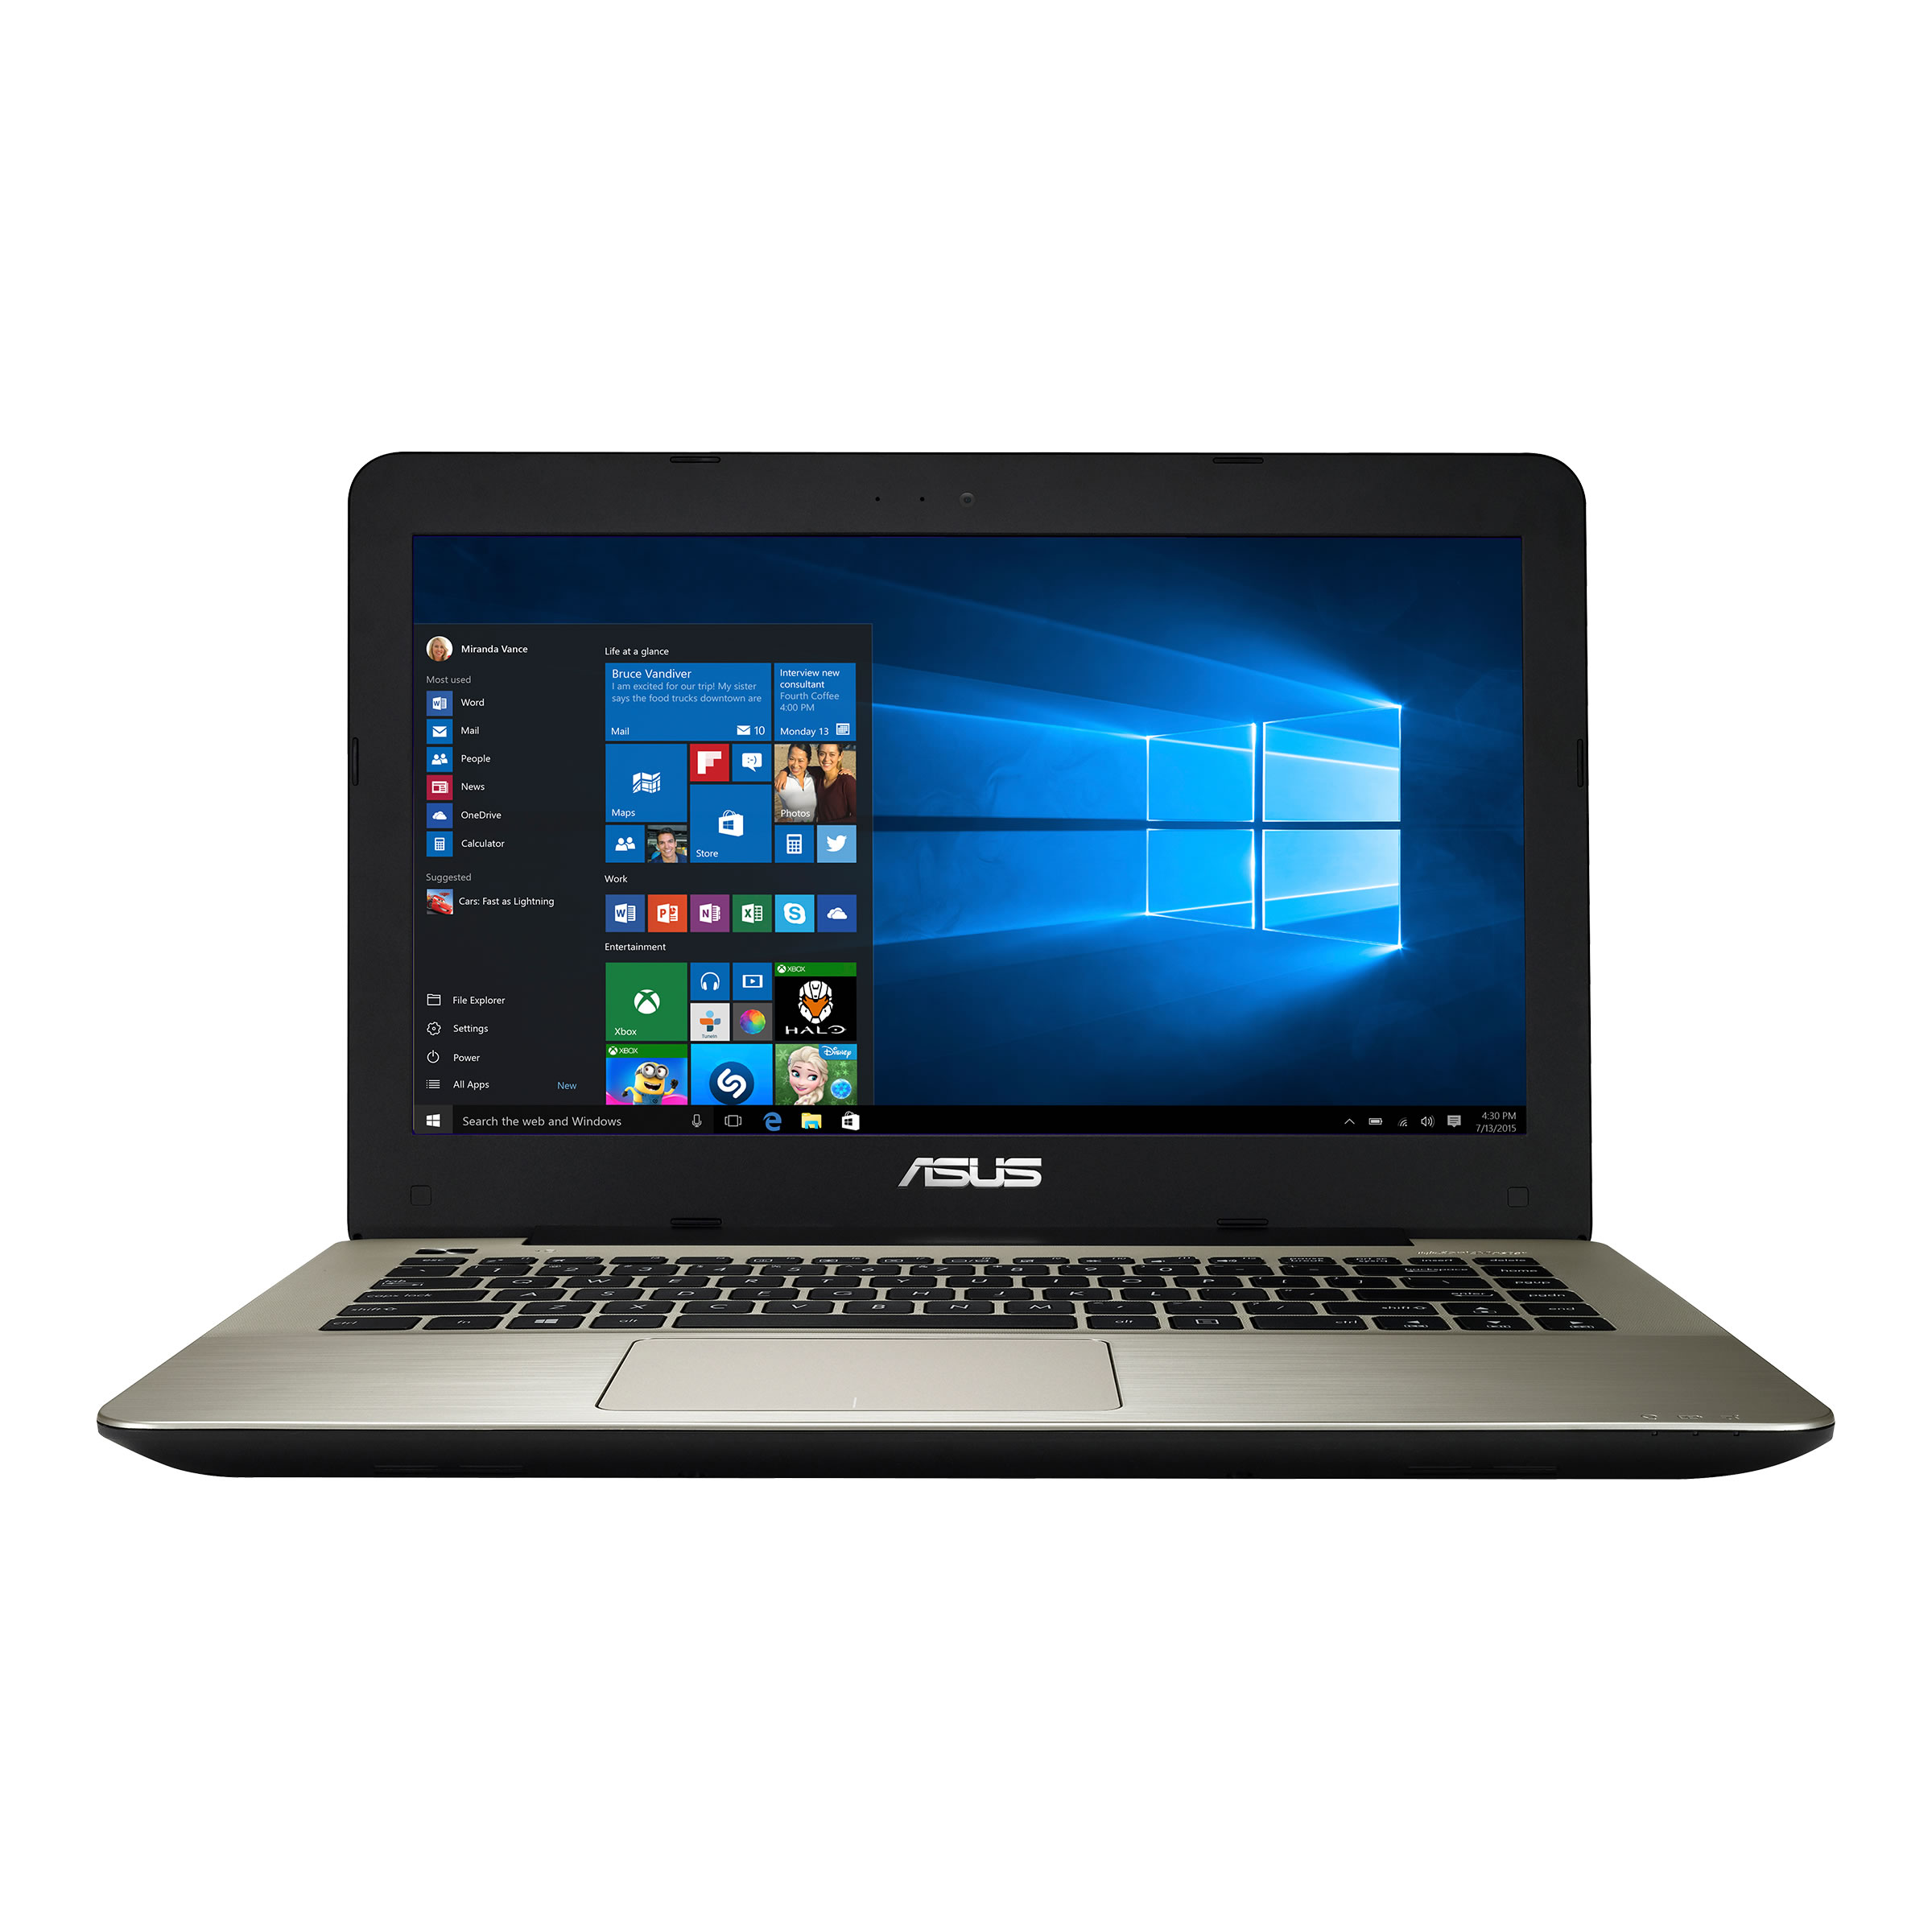 Asus X456UVK Notebook